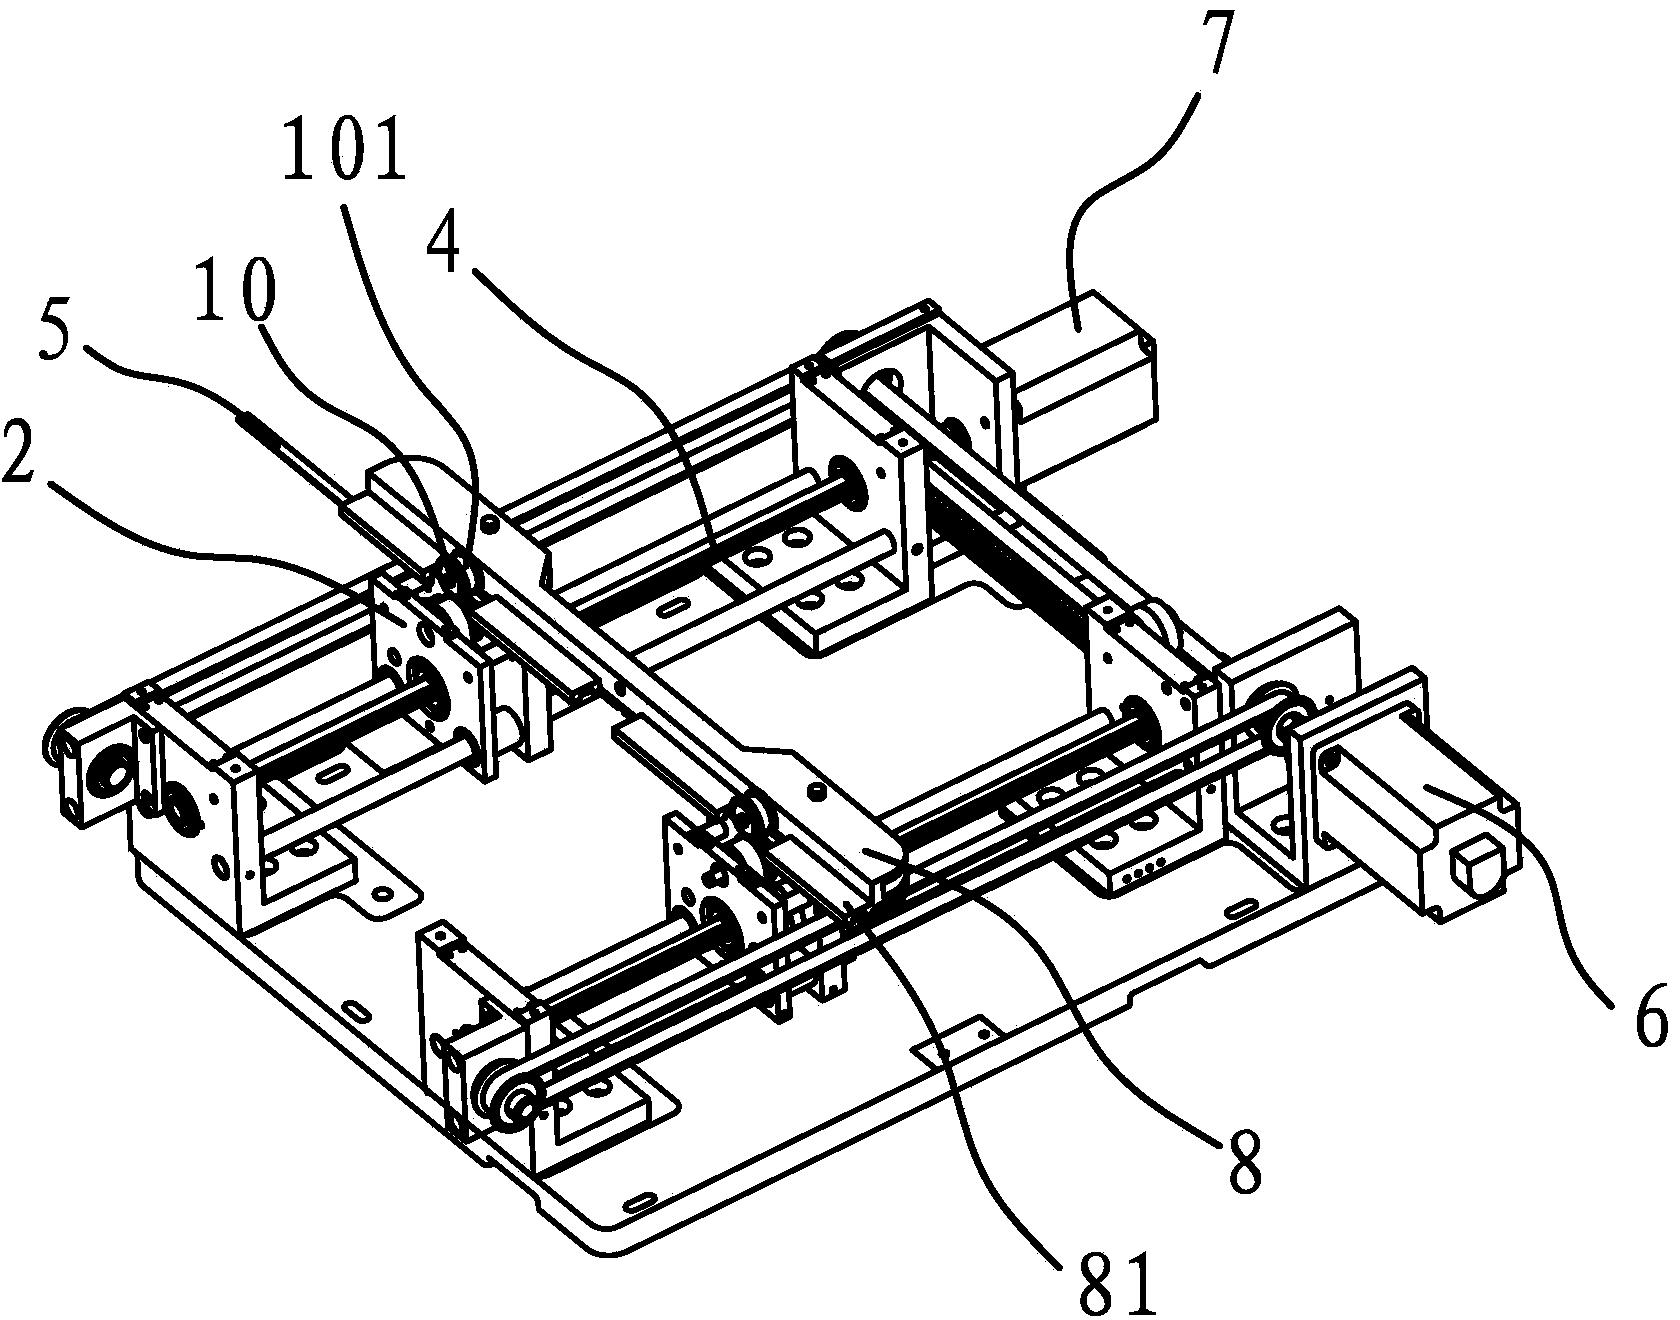 Template transmission mechanism for template-transporting sewing machine